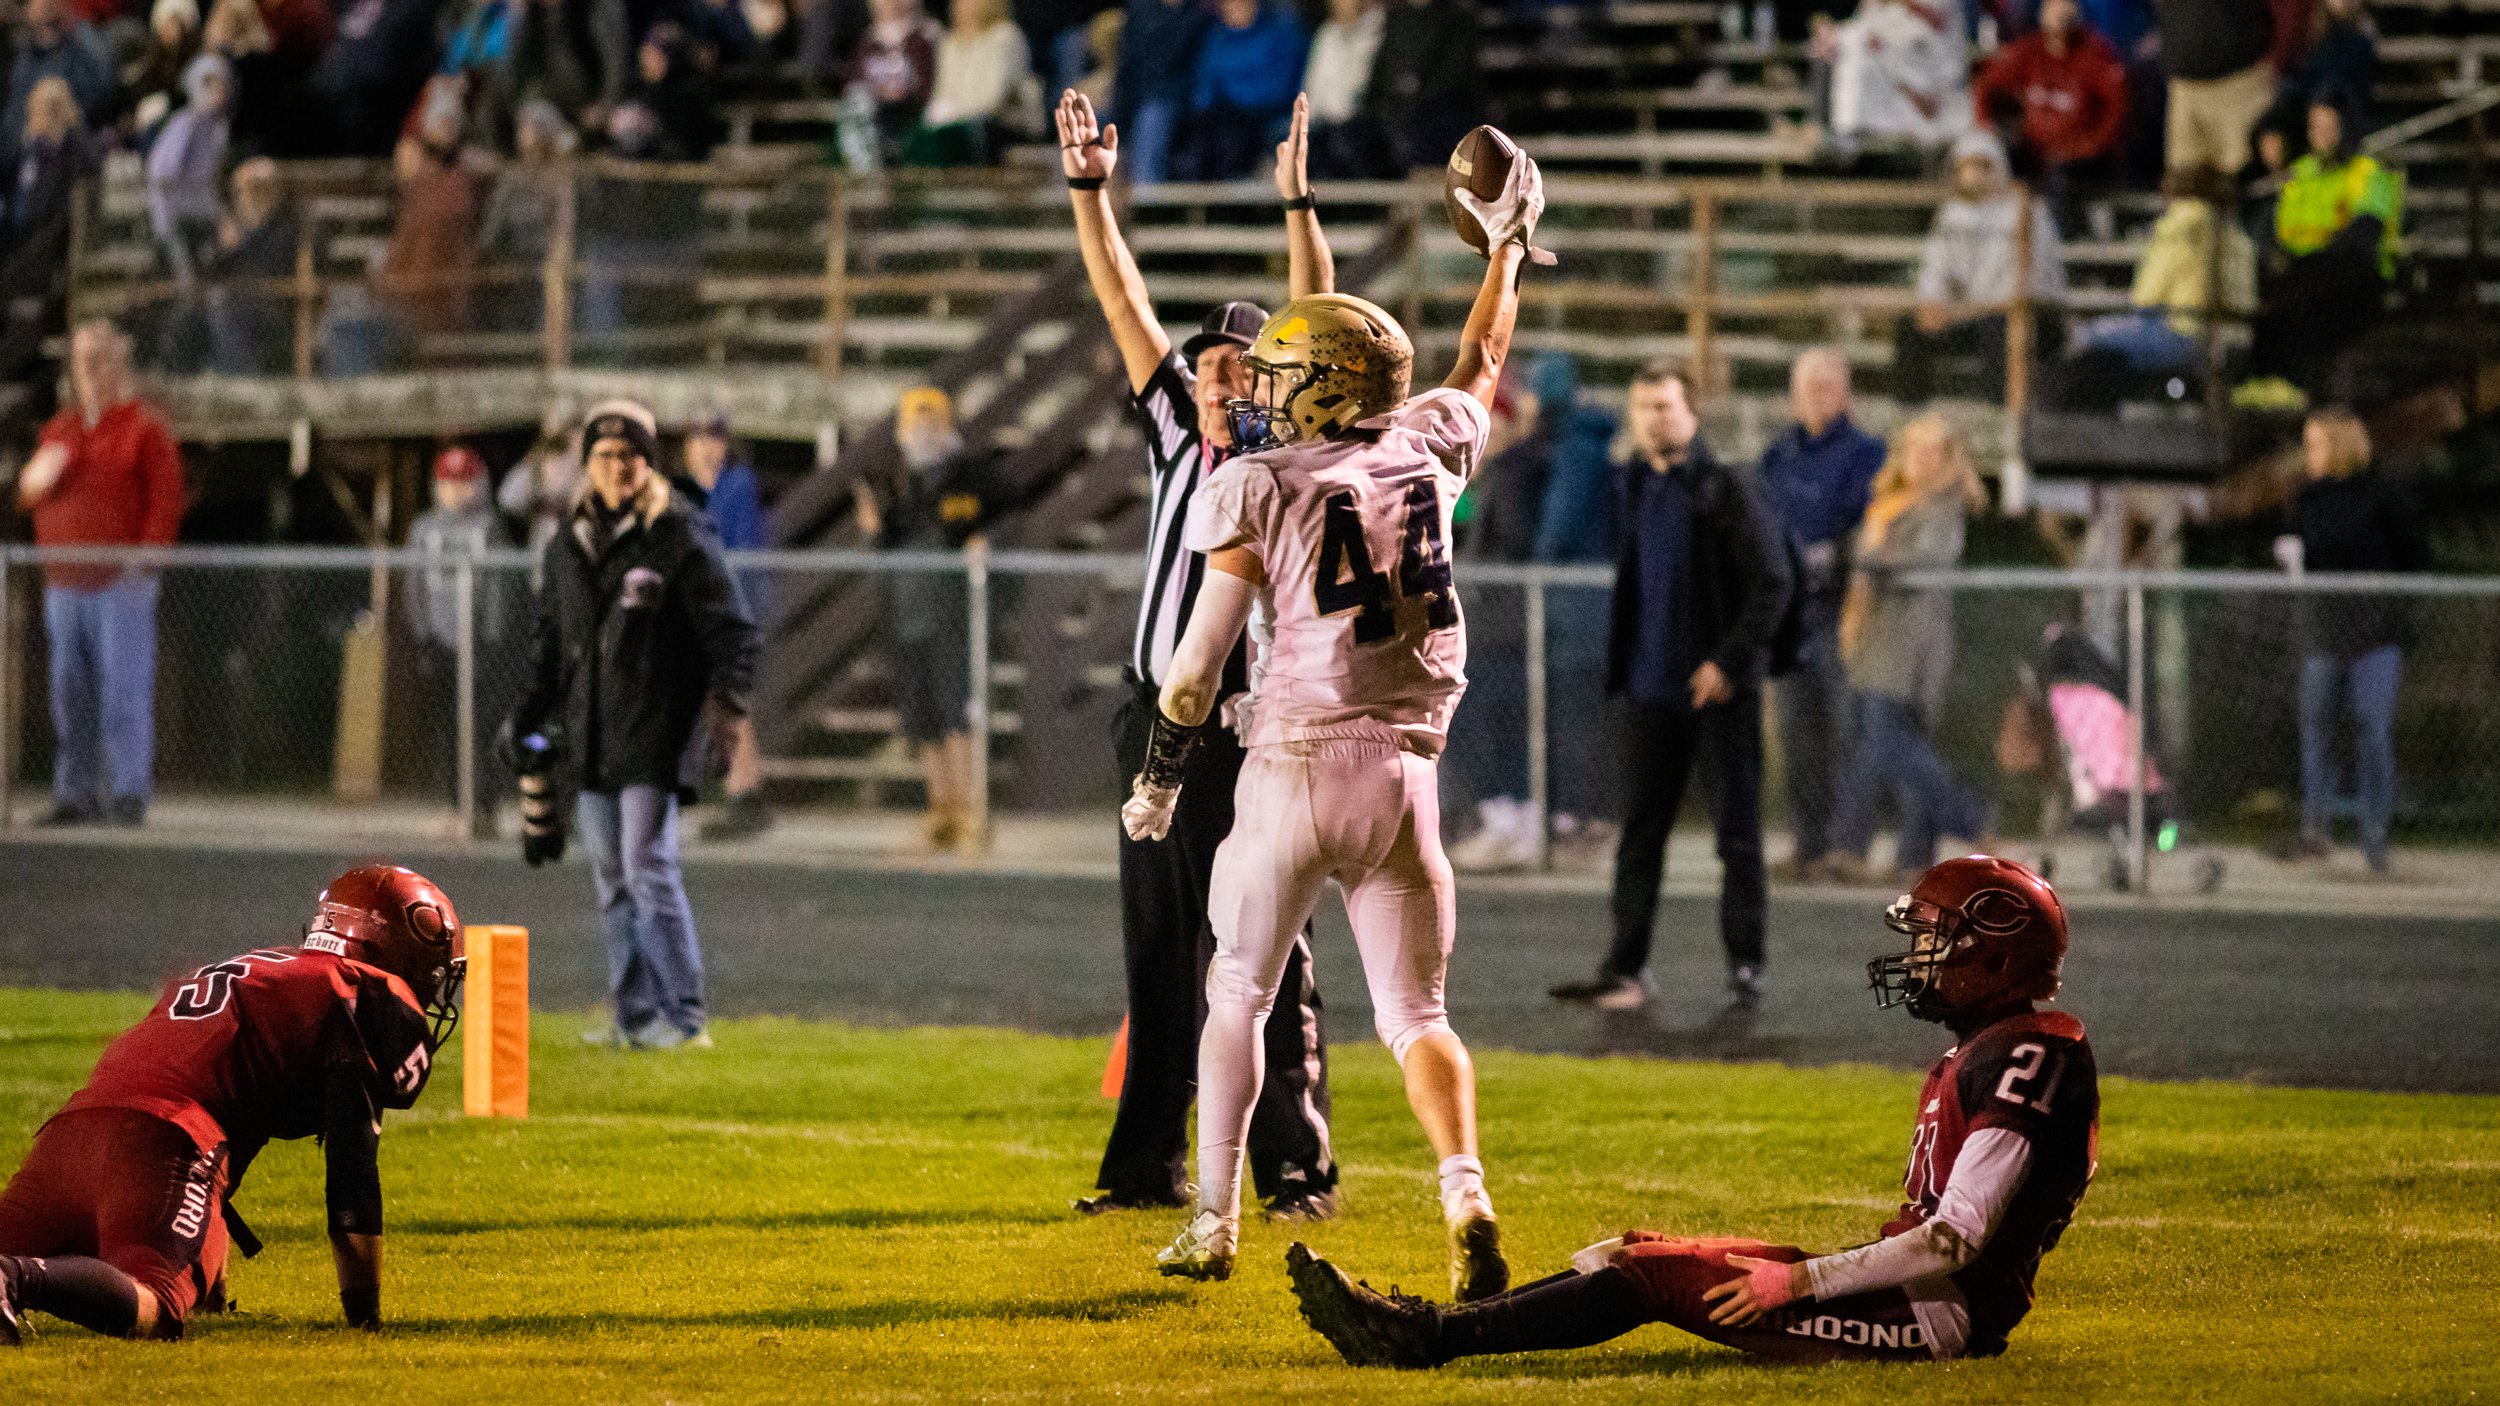 Game-winning catch, Concord, N.H., October 2022